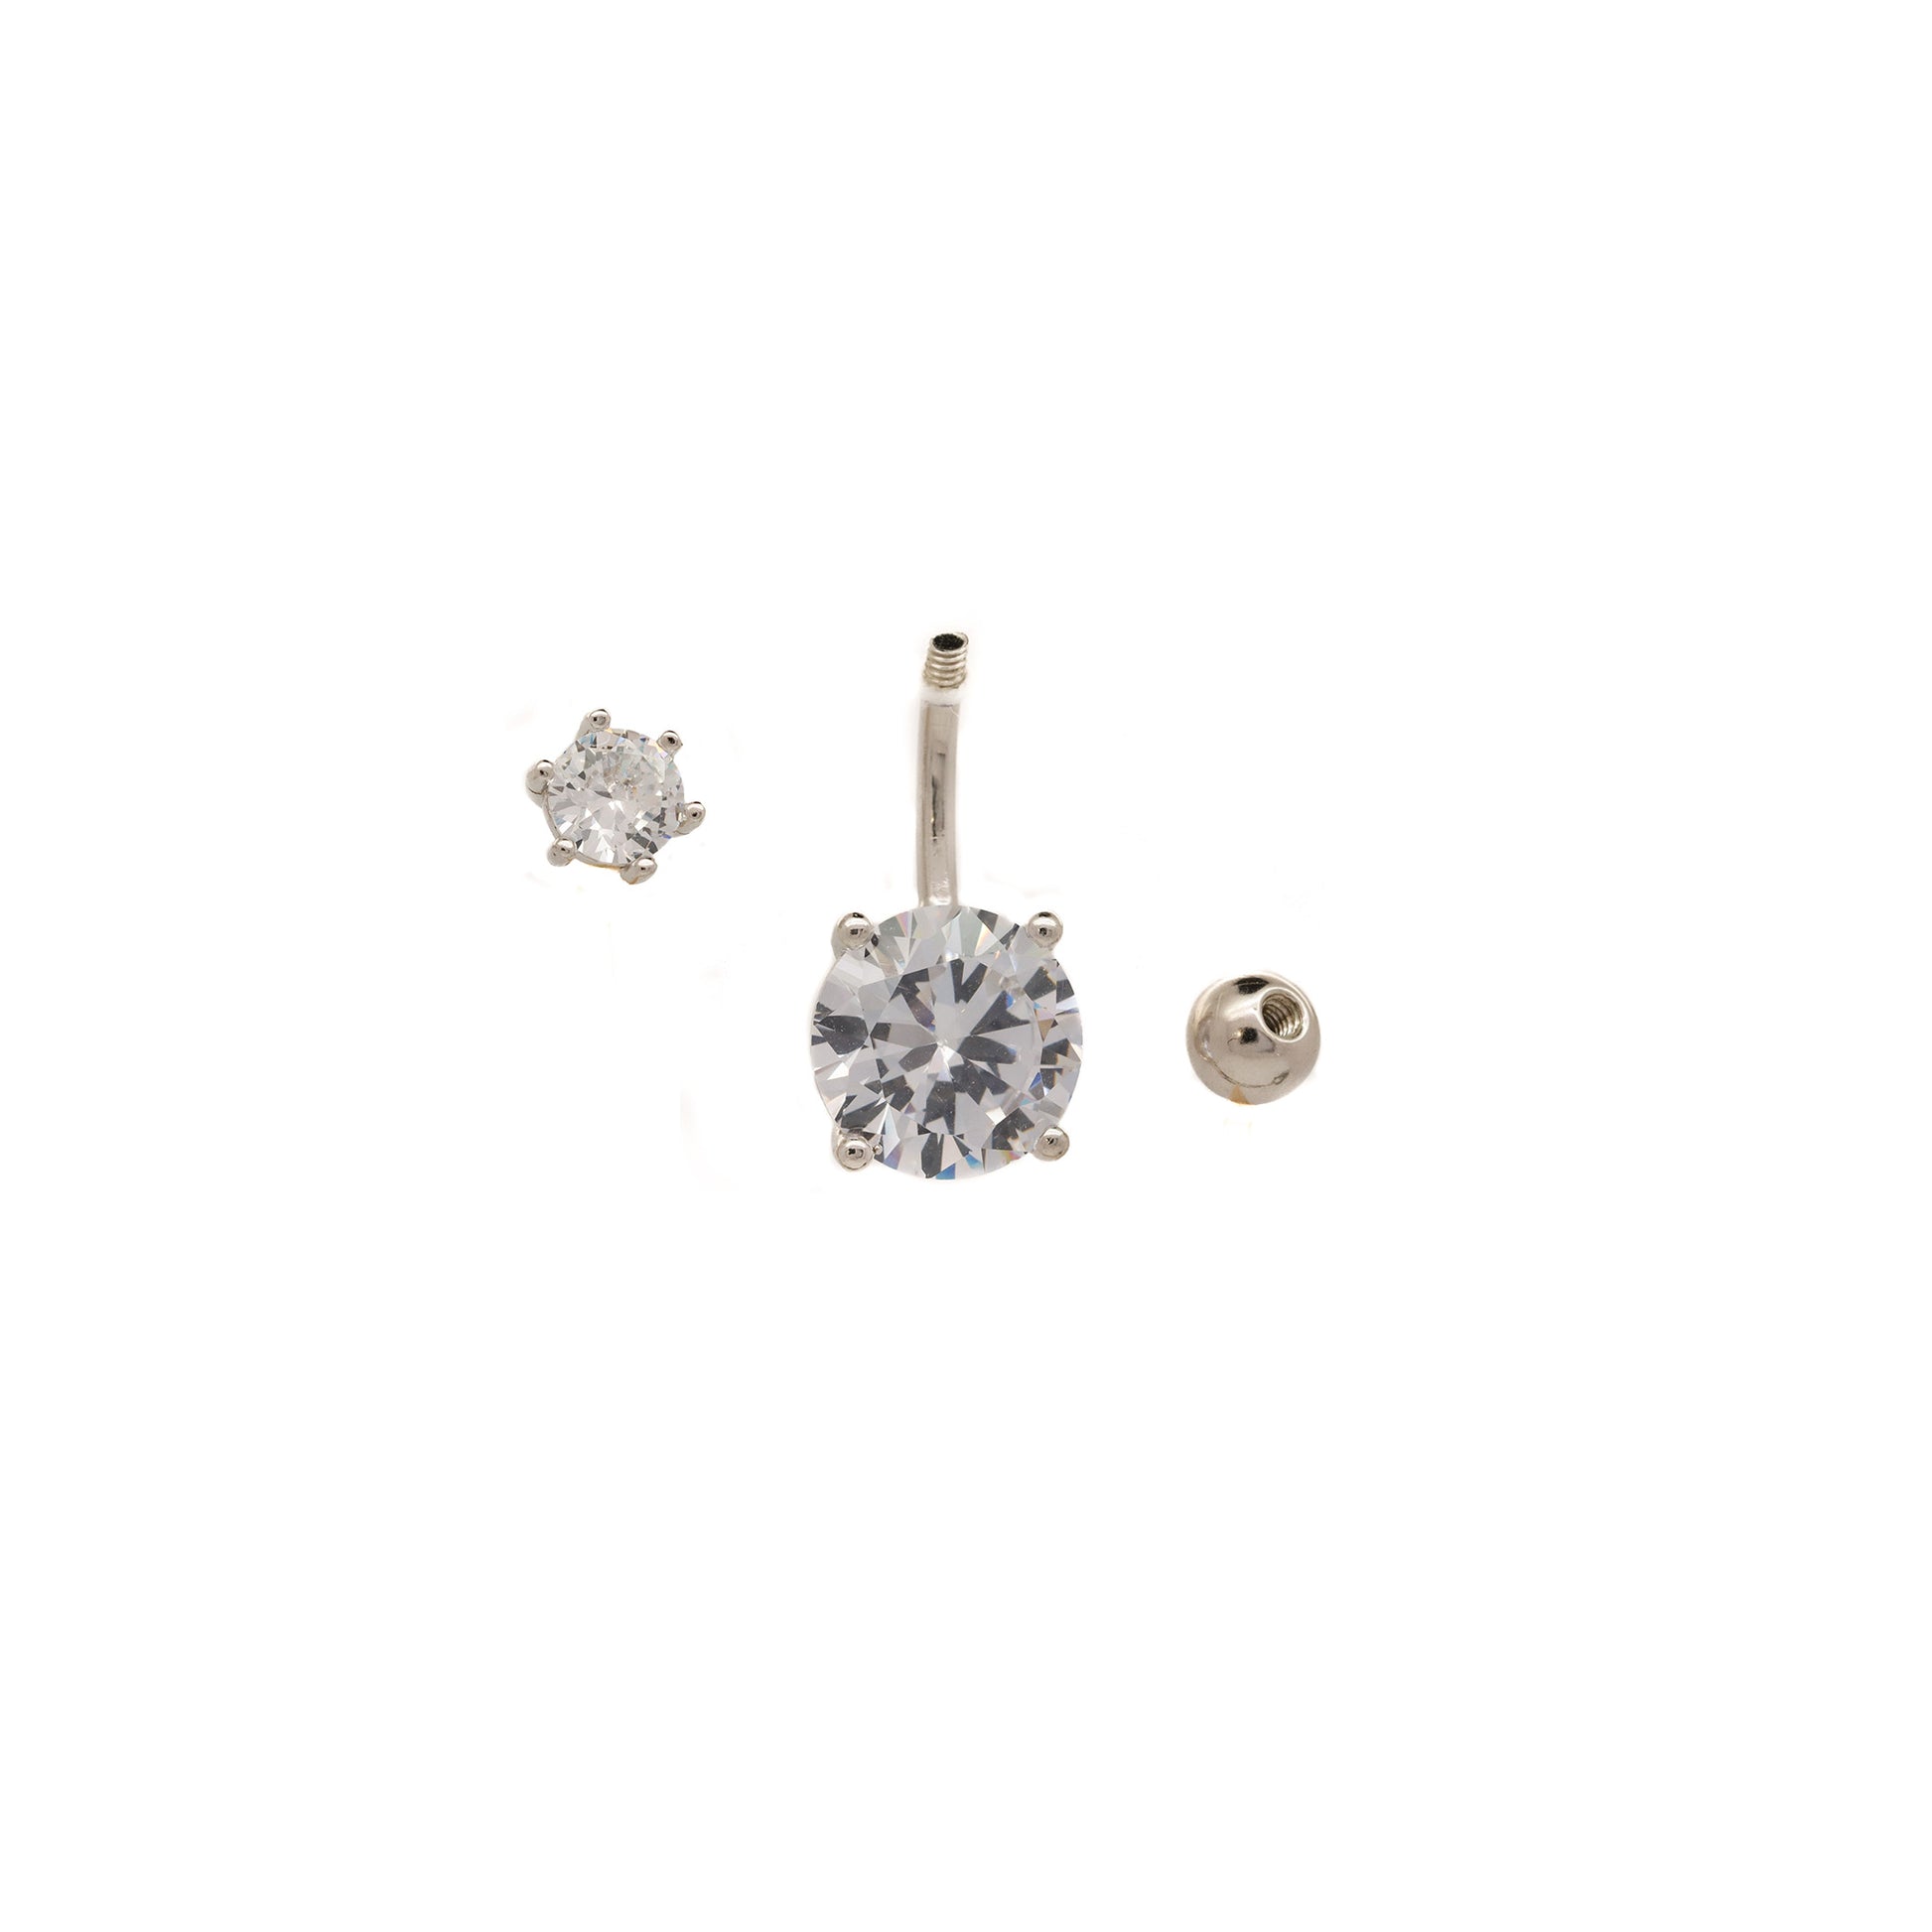 Solid 925 Silver | Solitaire Stone Belly Ring with Cubic Zirconia | 6mm 1/4" 8mm 5/16" 10mm 3/8" - Sturdy South